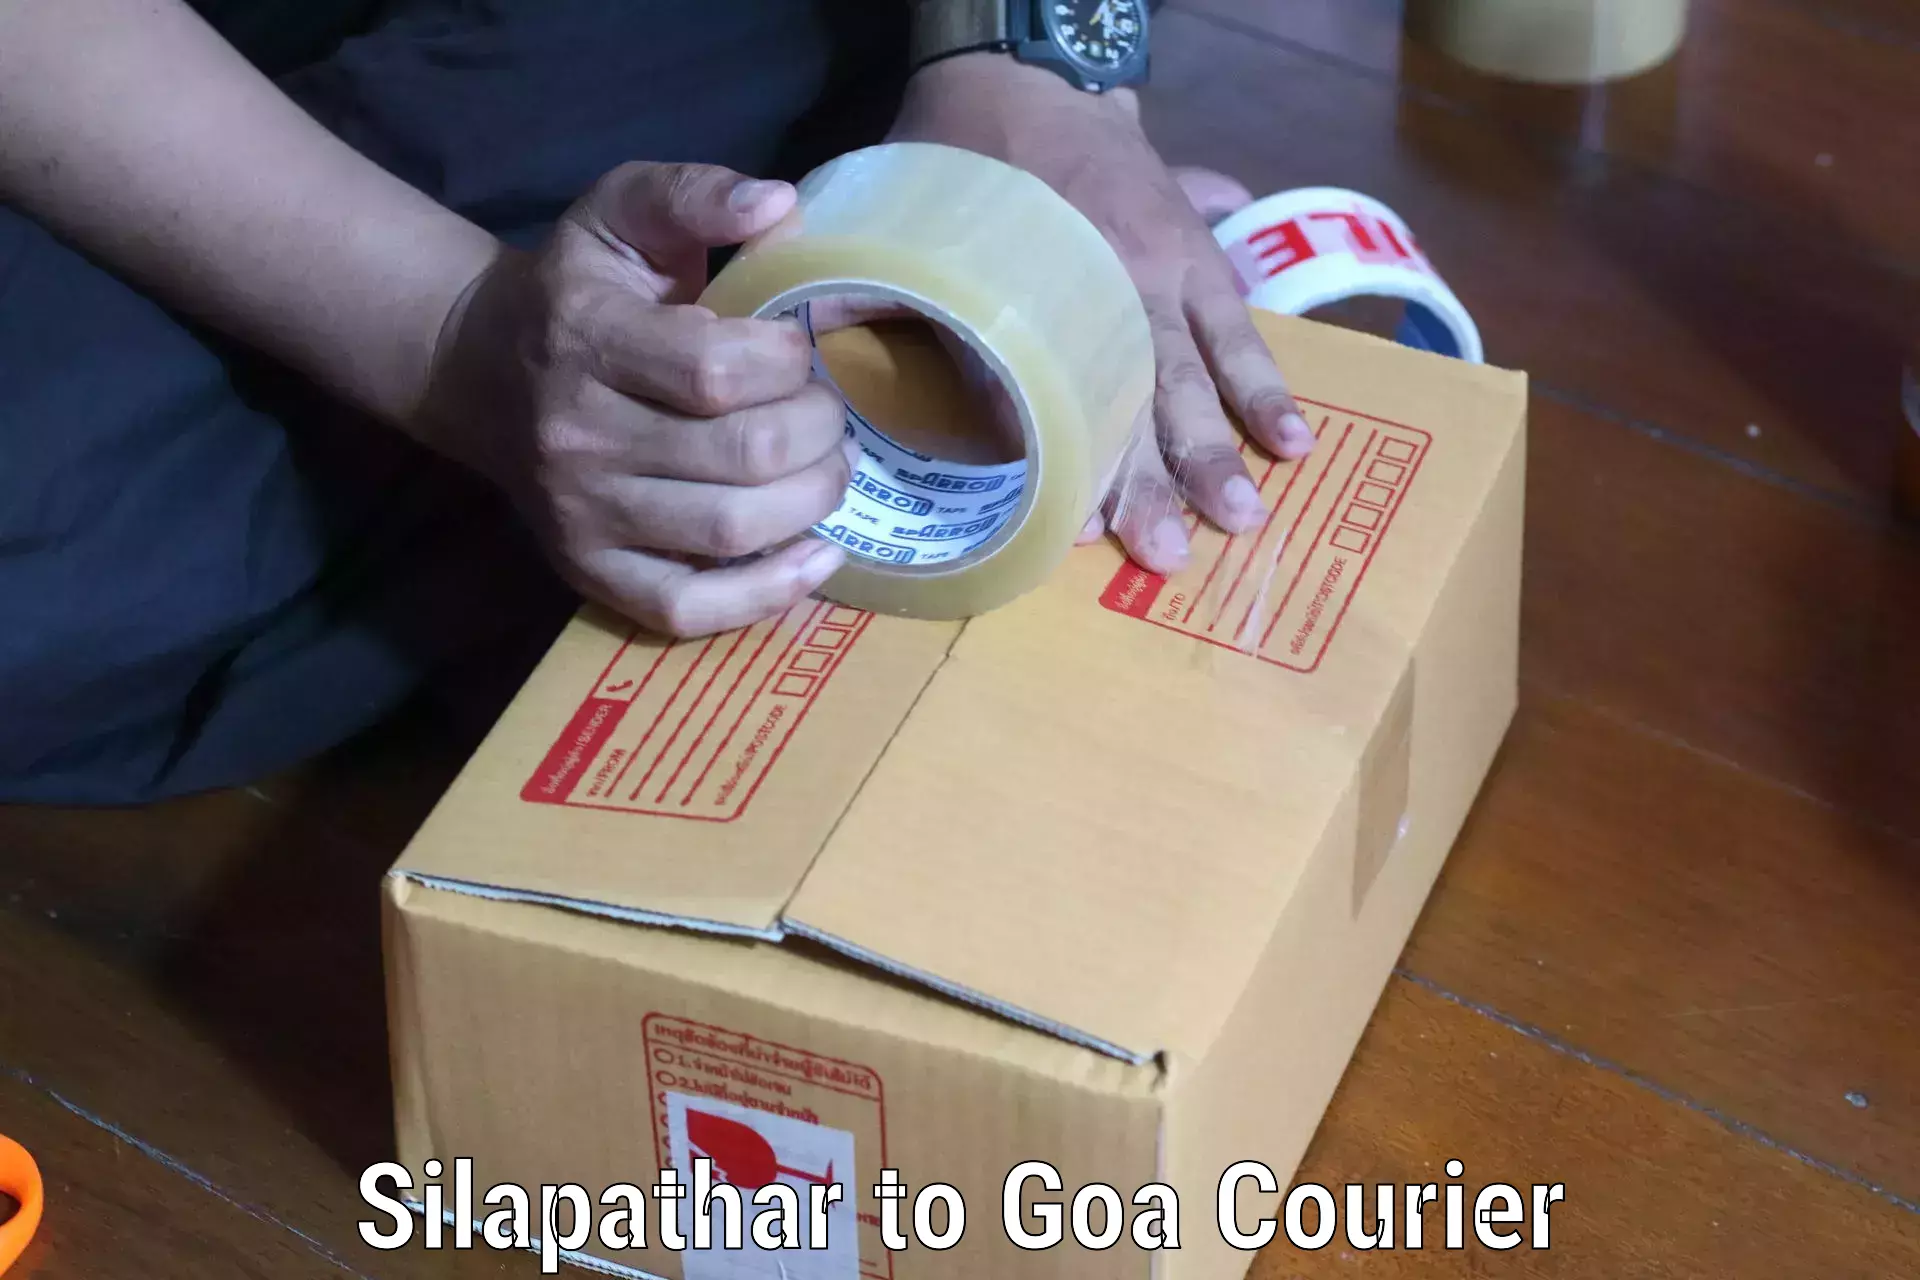 Versatile courier offerings Silapathar to Mormugao Port